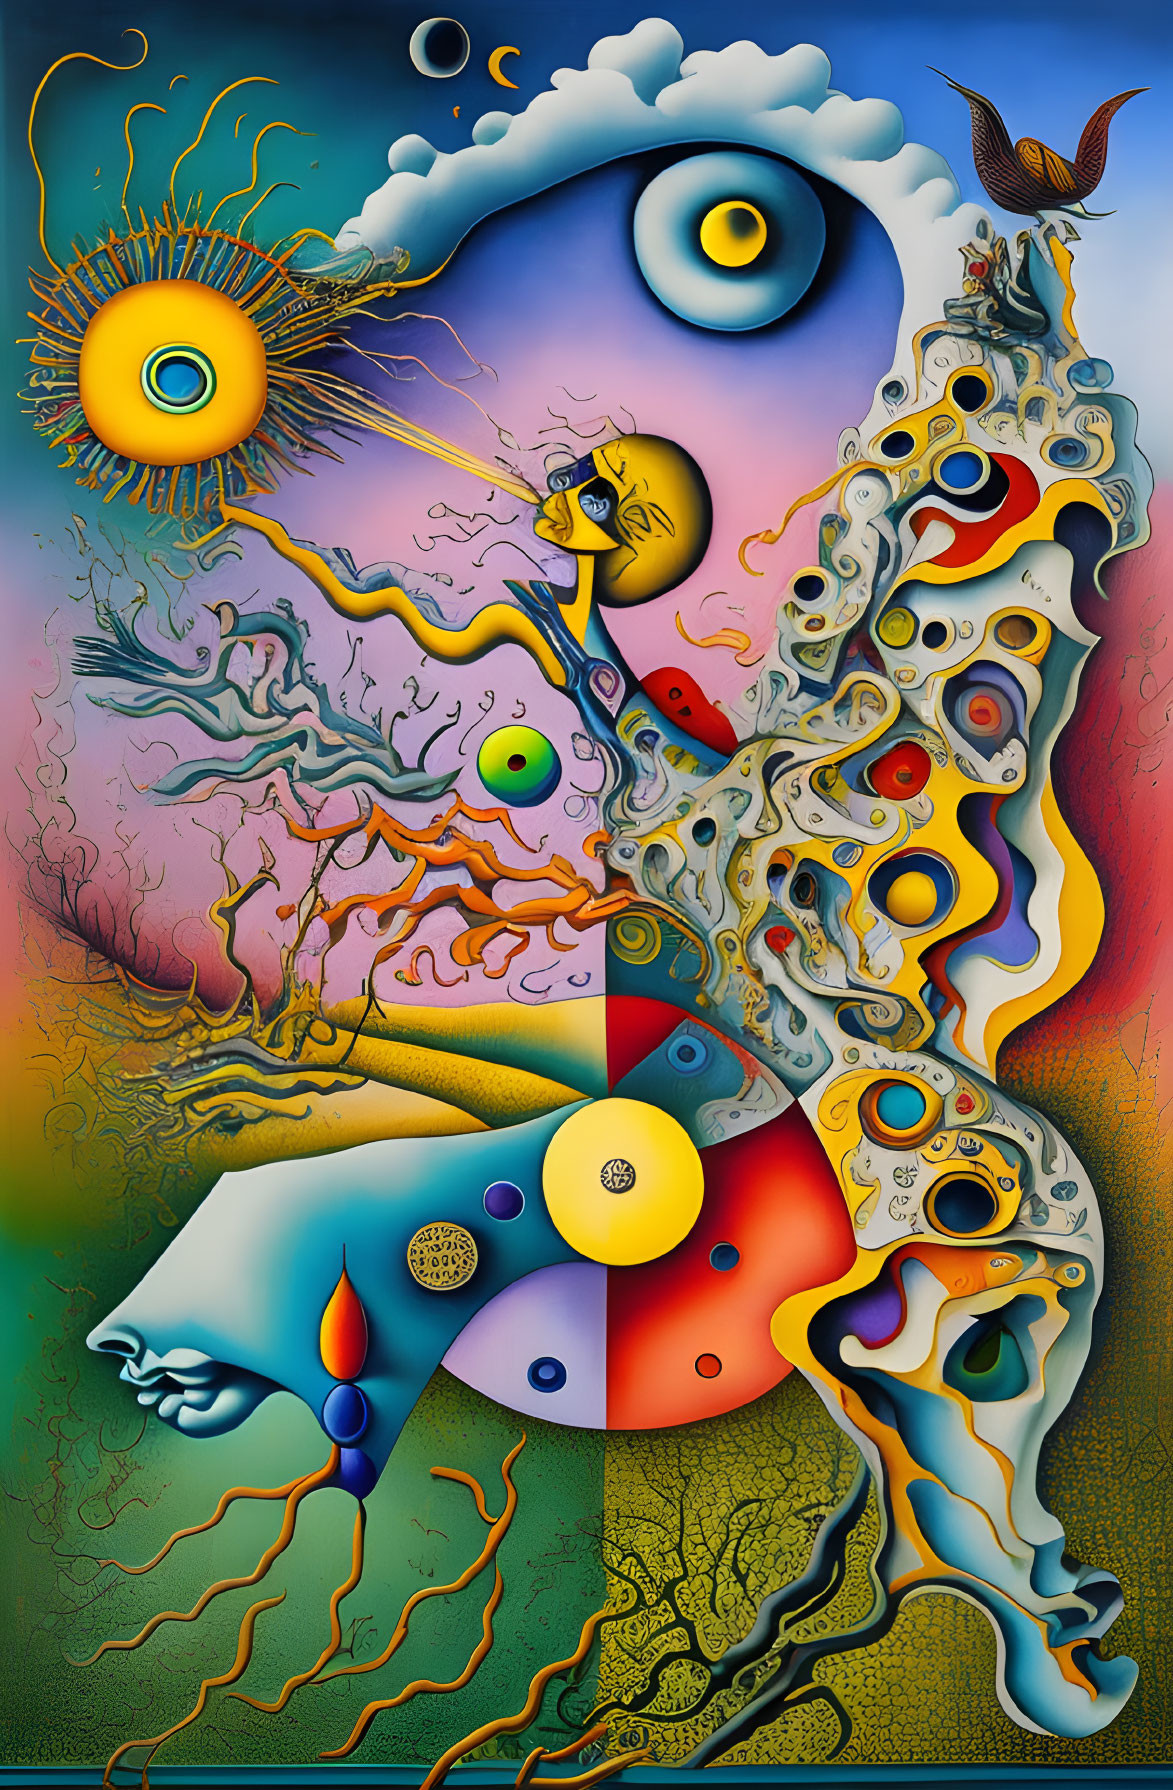 Vibrant surreal artwork: eye in sun, figure with horn, abstract forms, colorful background